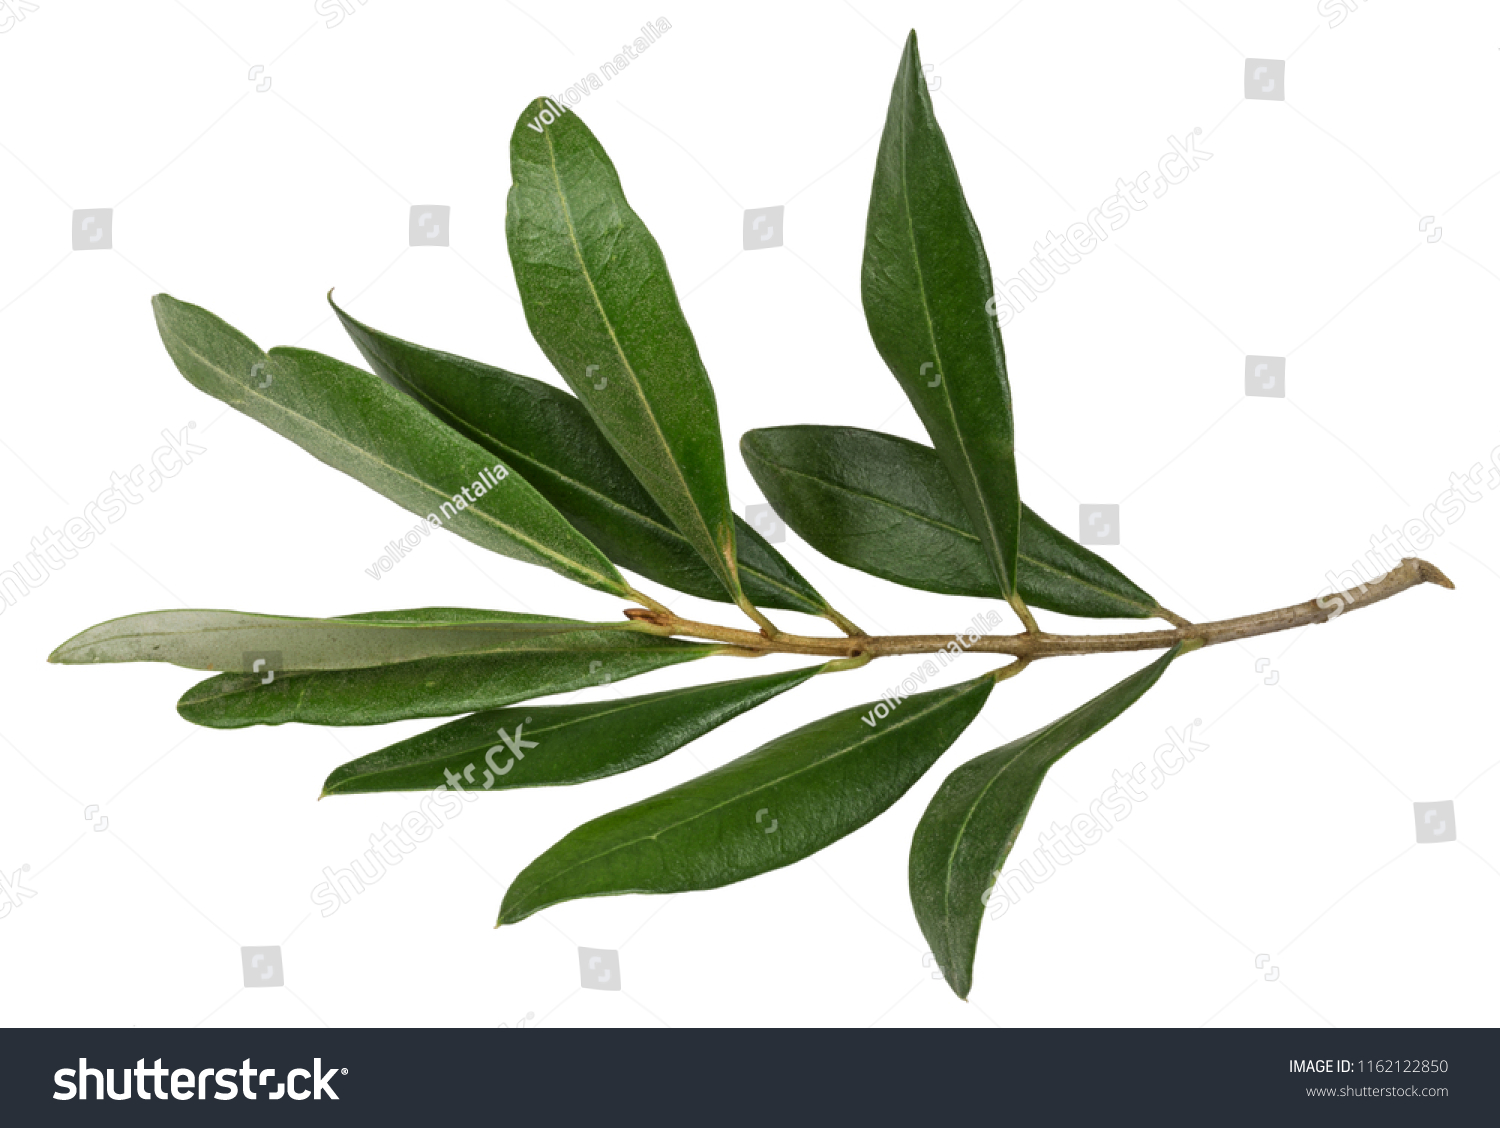 Olive Branch Leaves On White Background Stock Photo 1162122850 ...